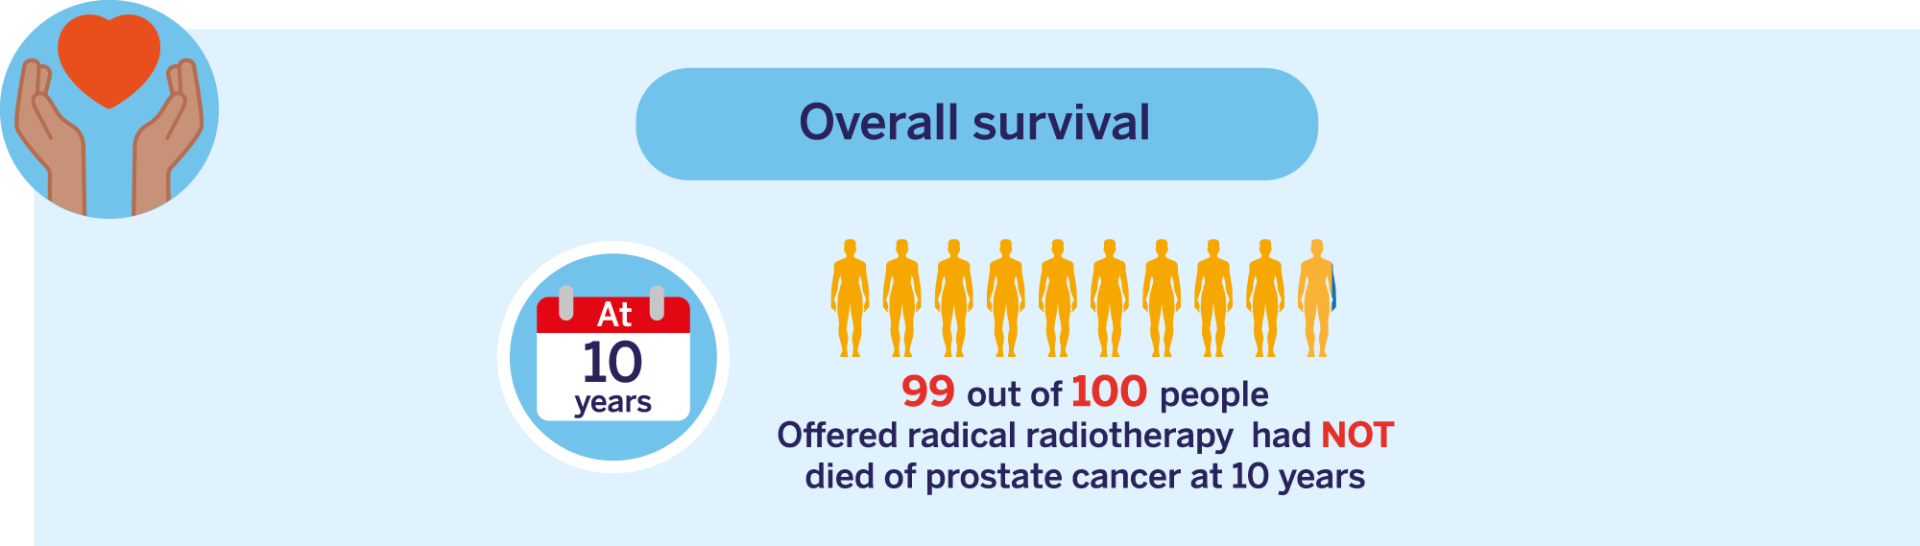 Overall survival external beam radiotherapy